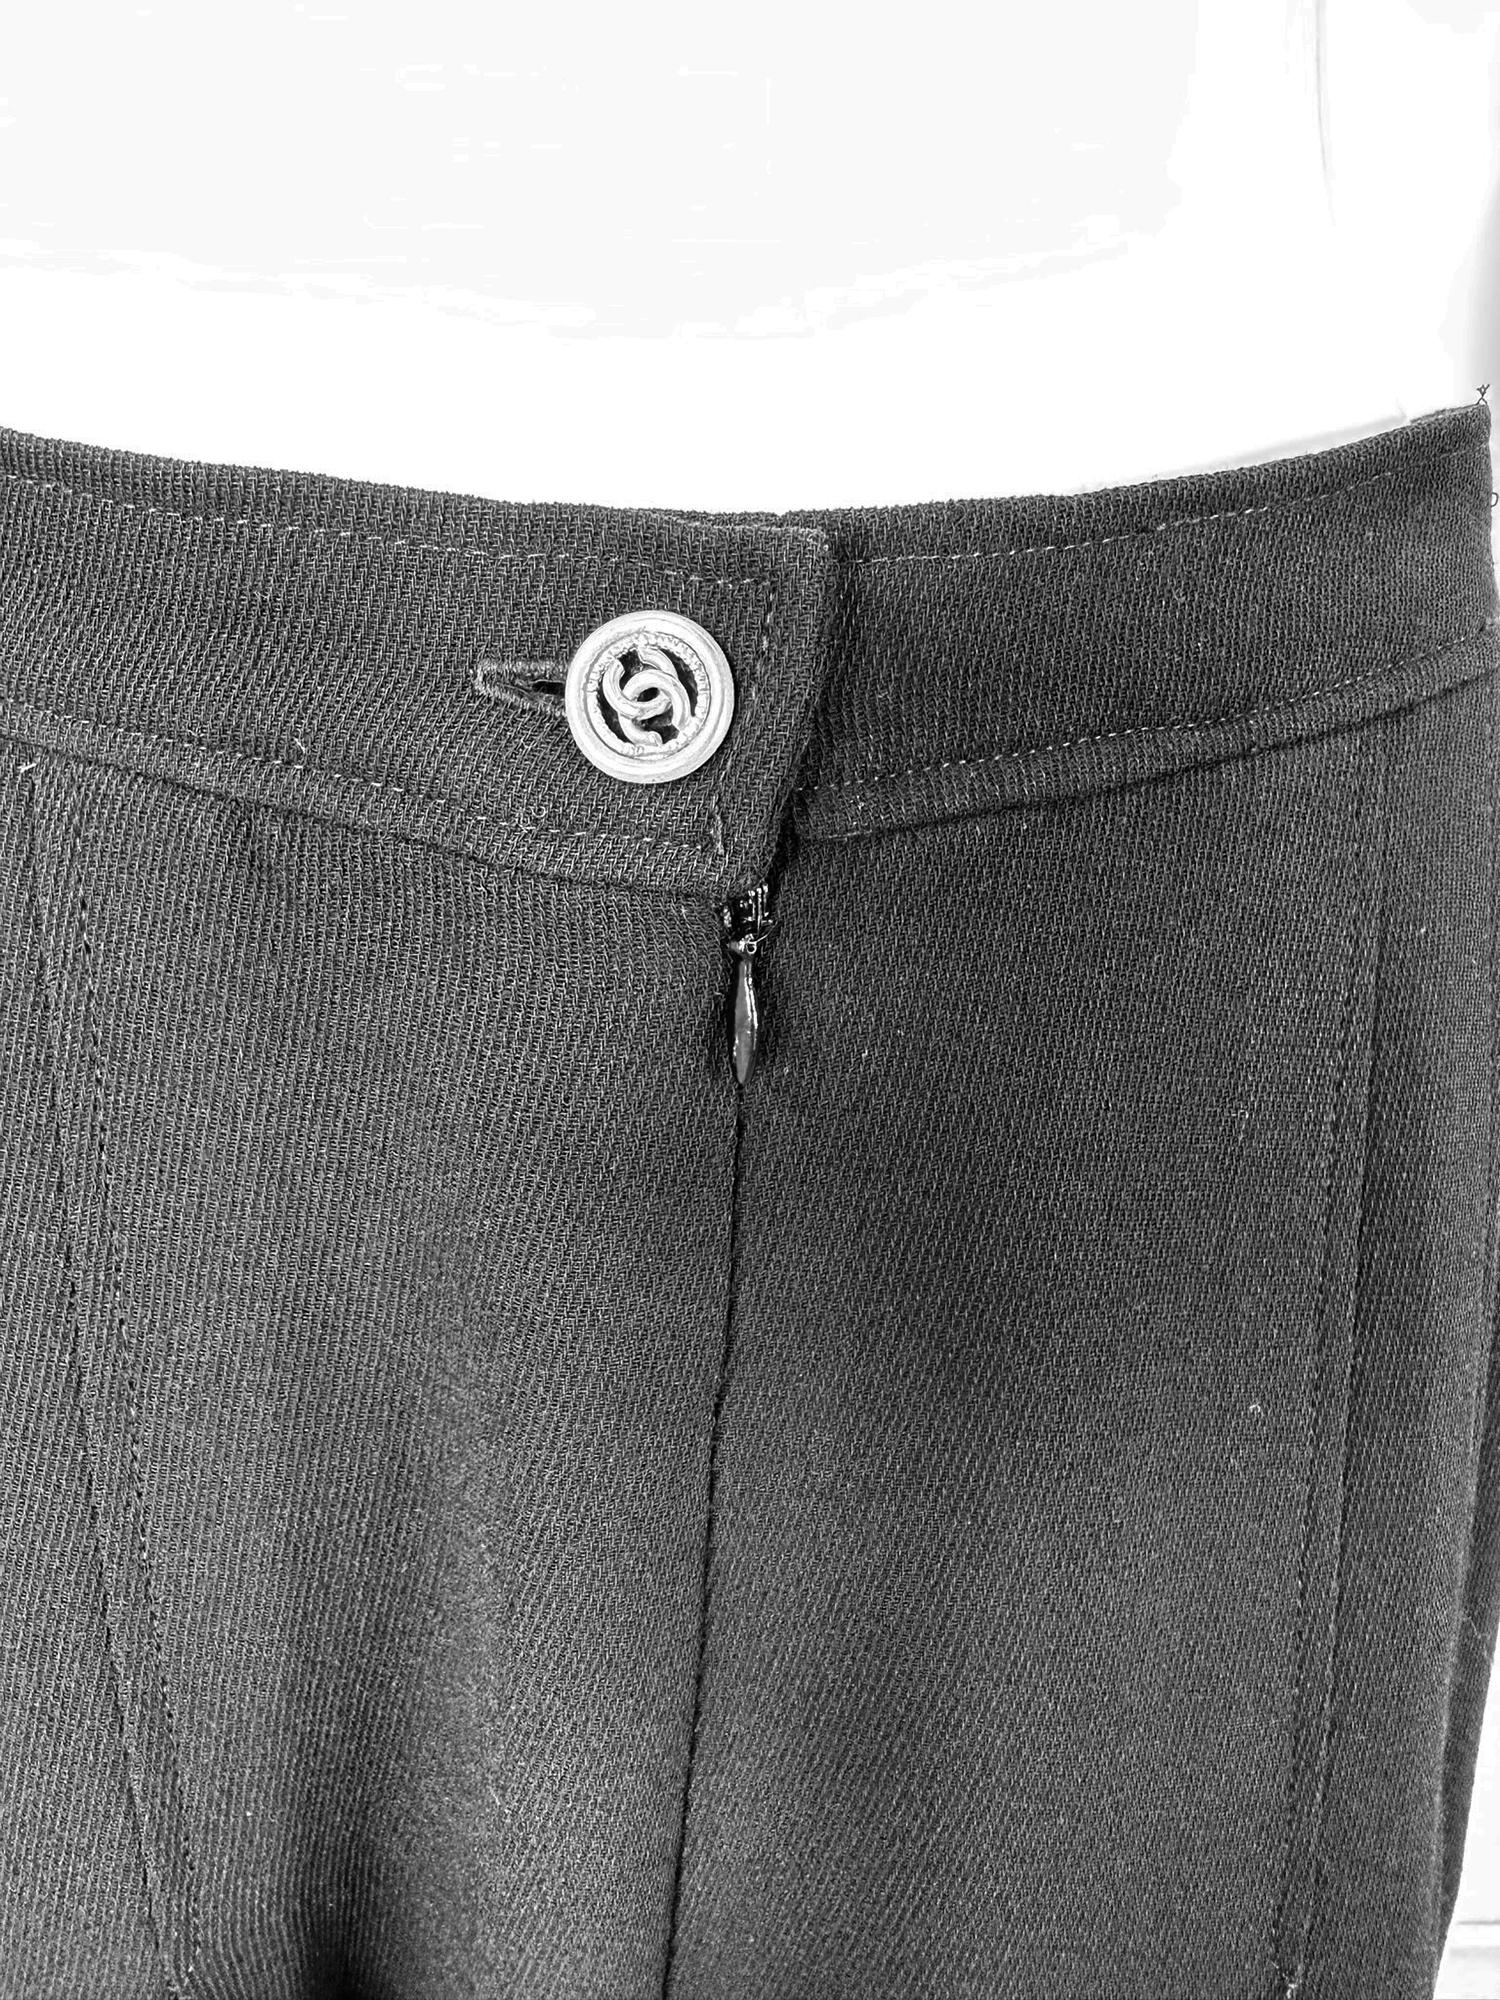 Chanel Black Wool Twill High Waist Pleat Front Full Wide Leg trouser 1995 In Good Condition In West Palm Beach, FL